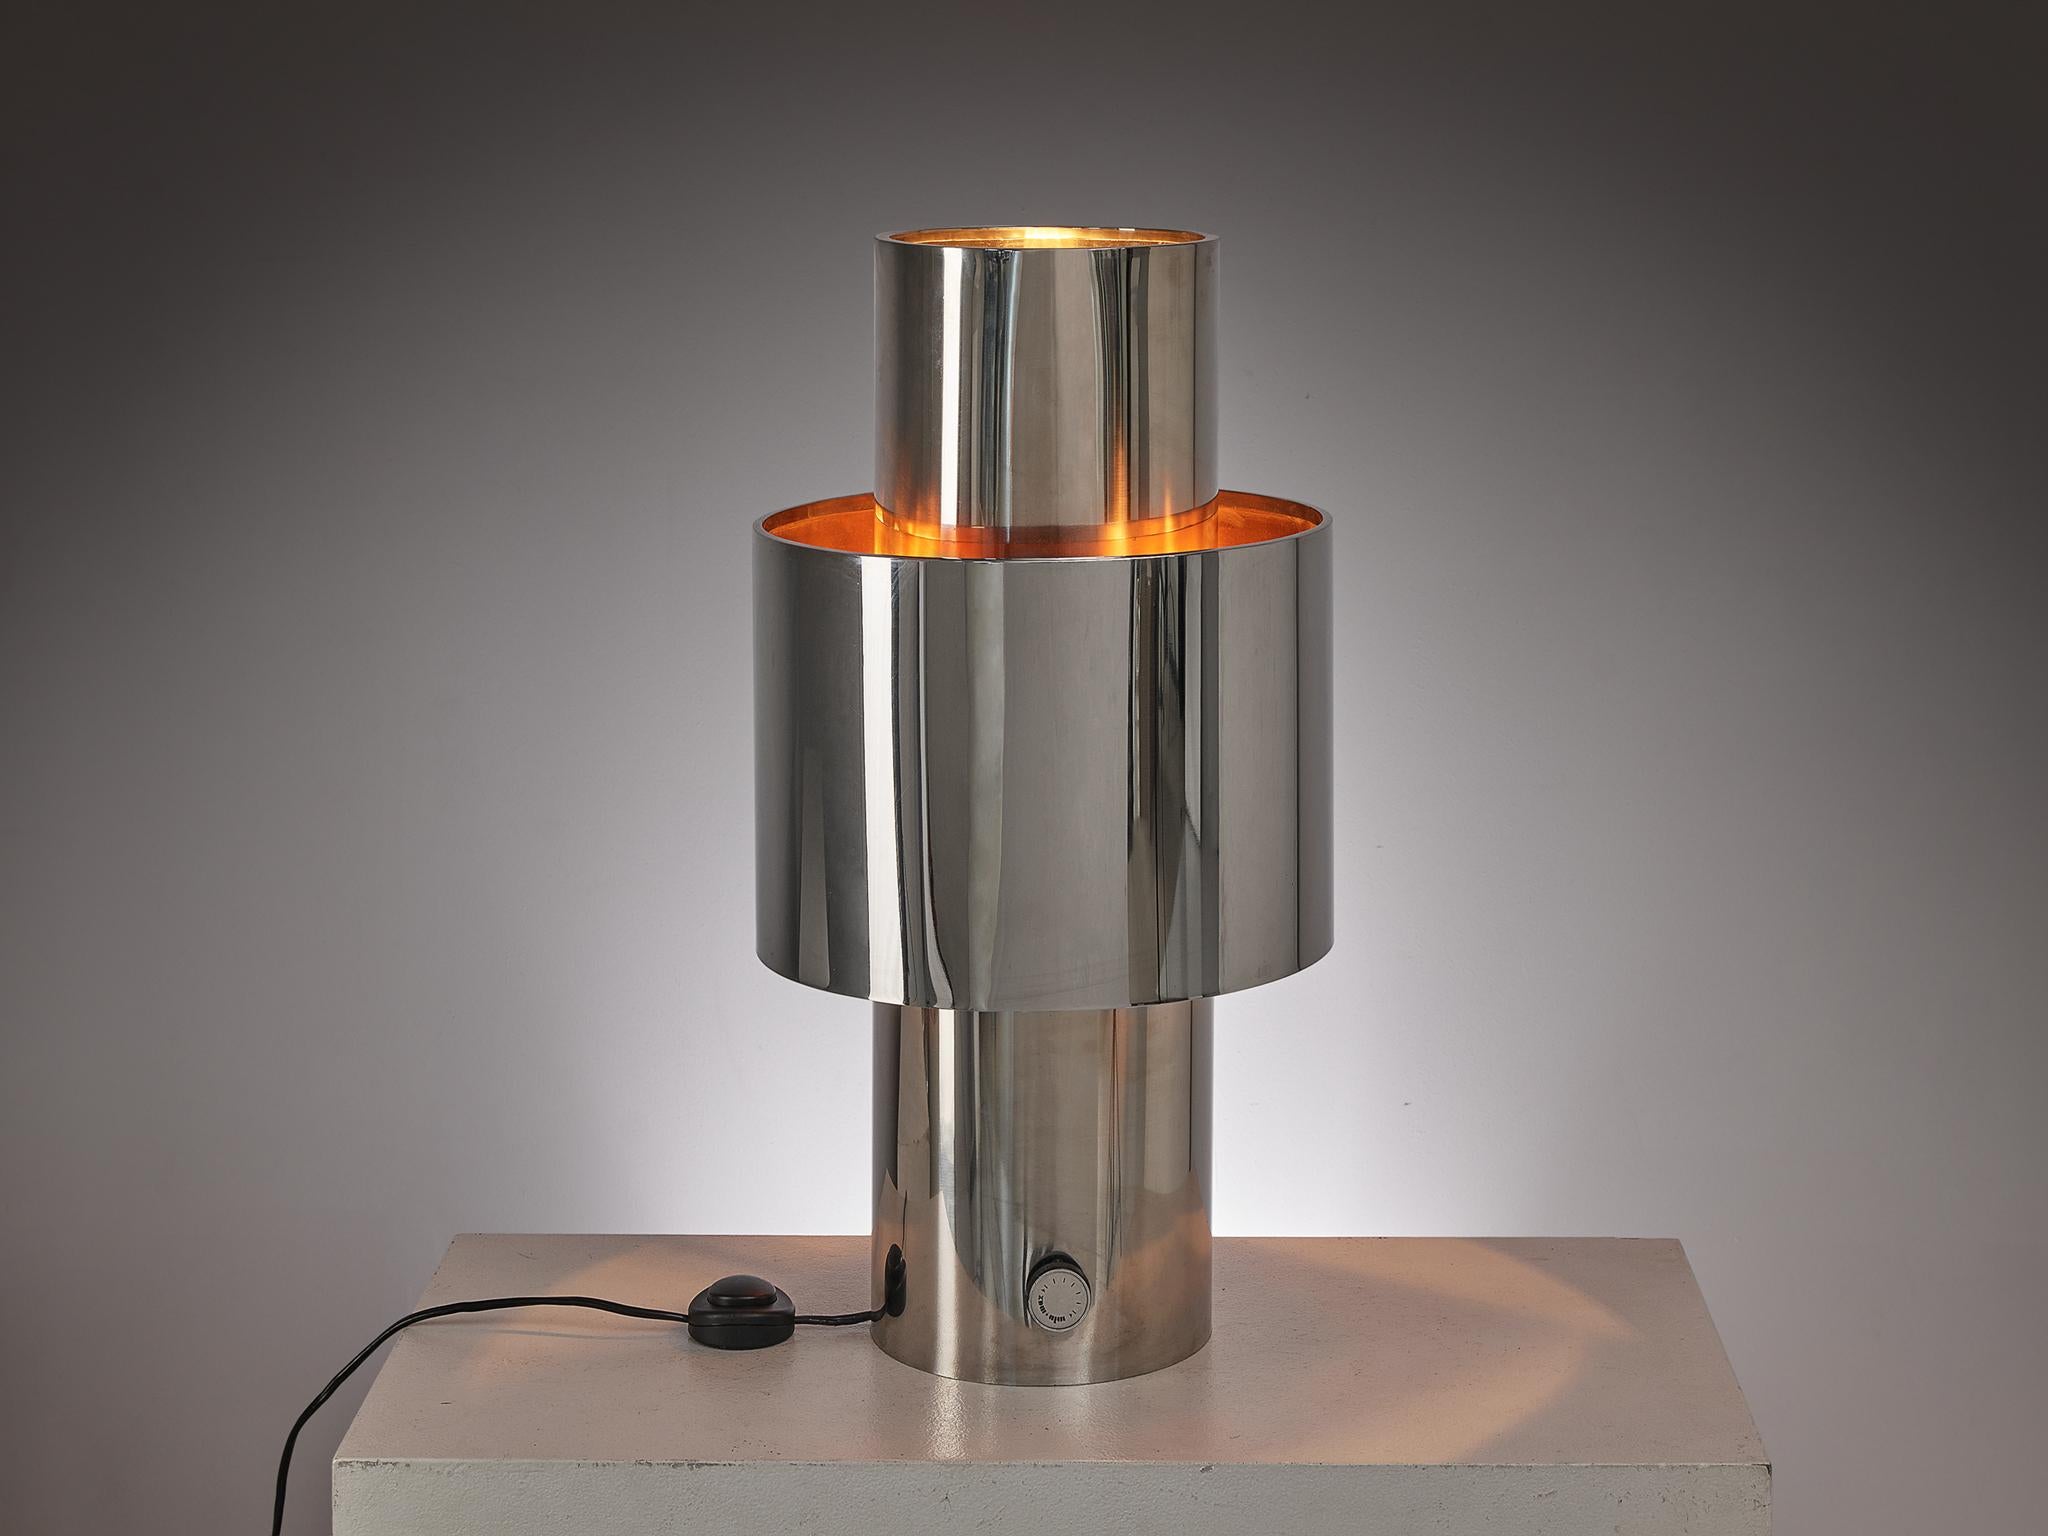 Willy Rizzo, table lamp, model 'Love', chrome, copper, plastic, Italy, circa 1971.

This unique table lamp is designed by Italian designer Willy Rizzo in the early 1970s. The design is mainly carried out through a repetition of cylindrical shapes